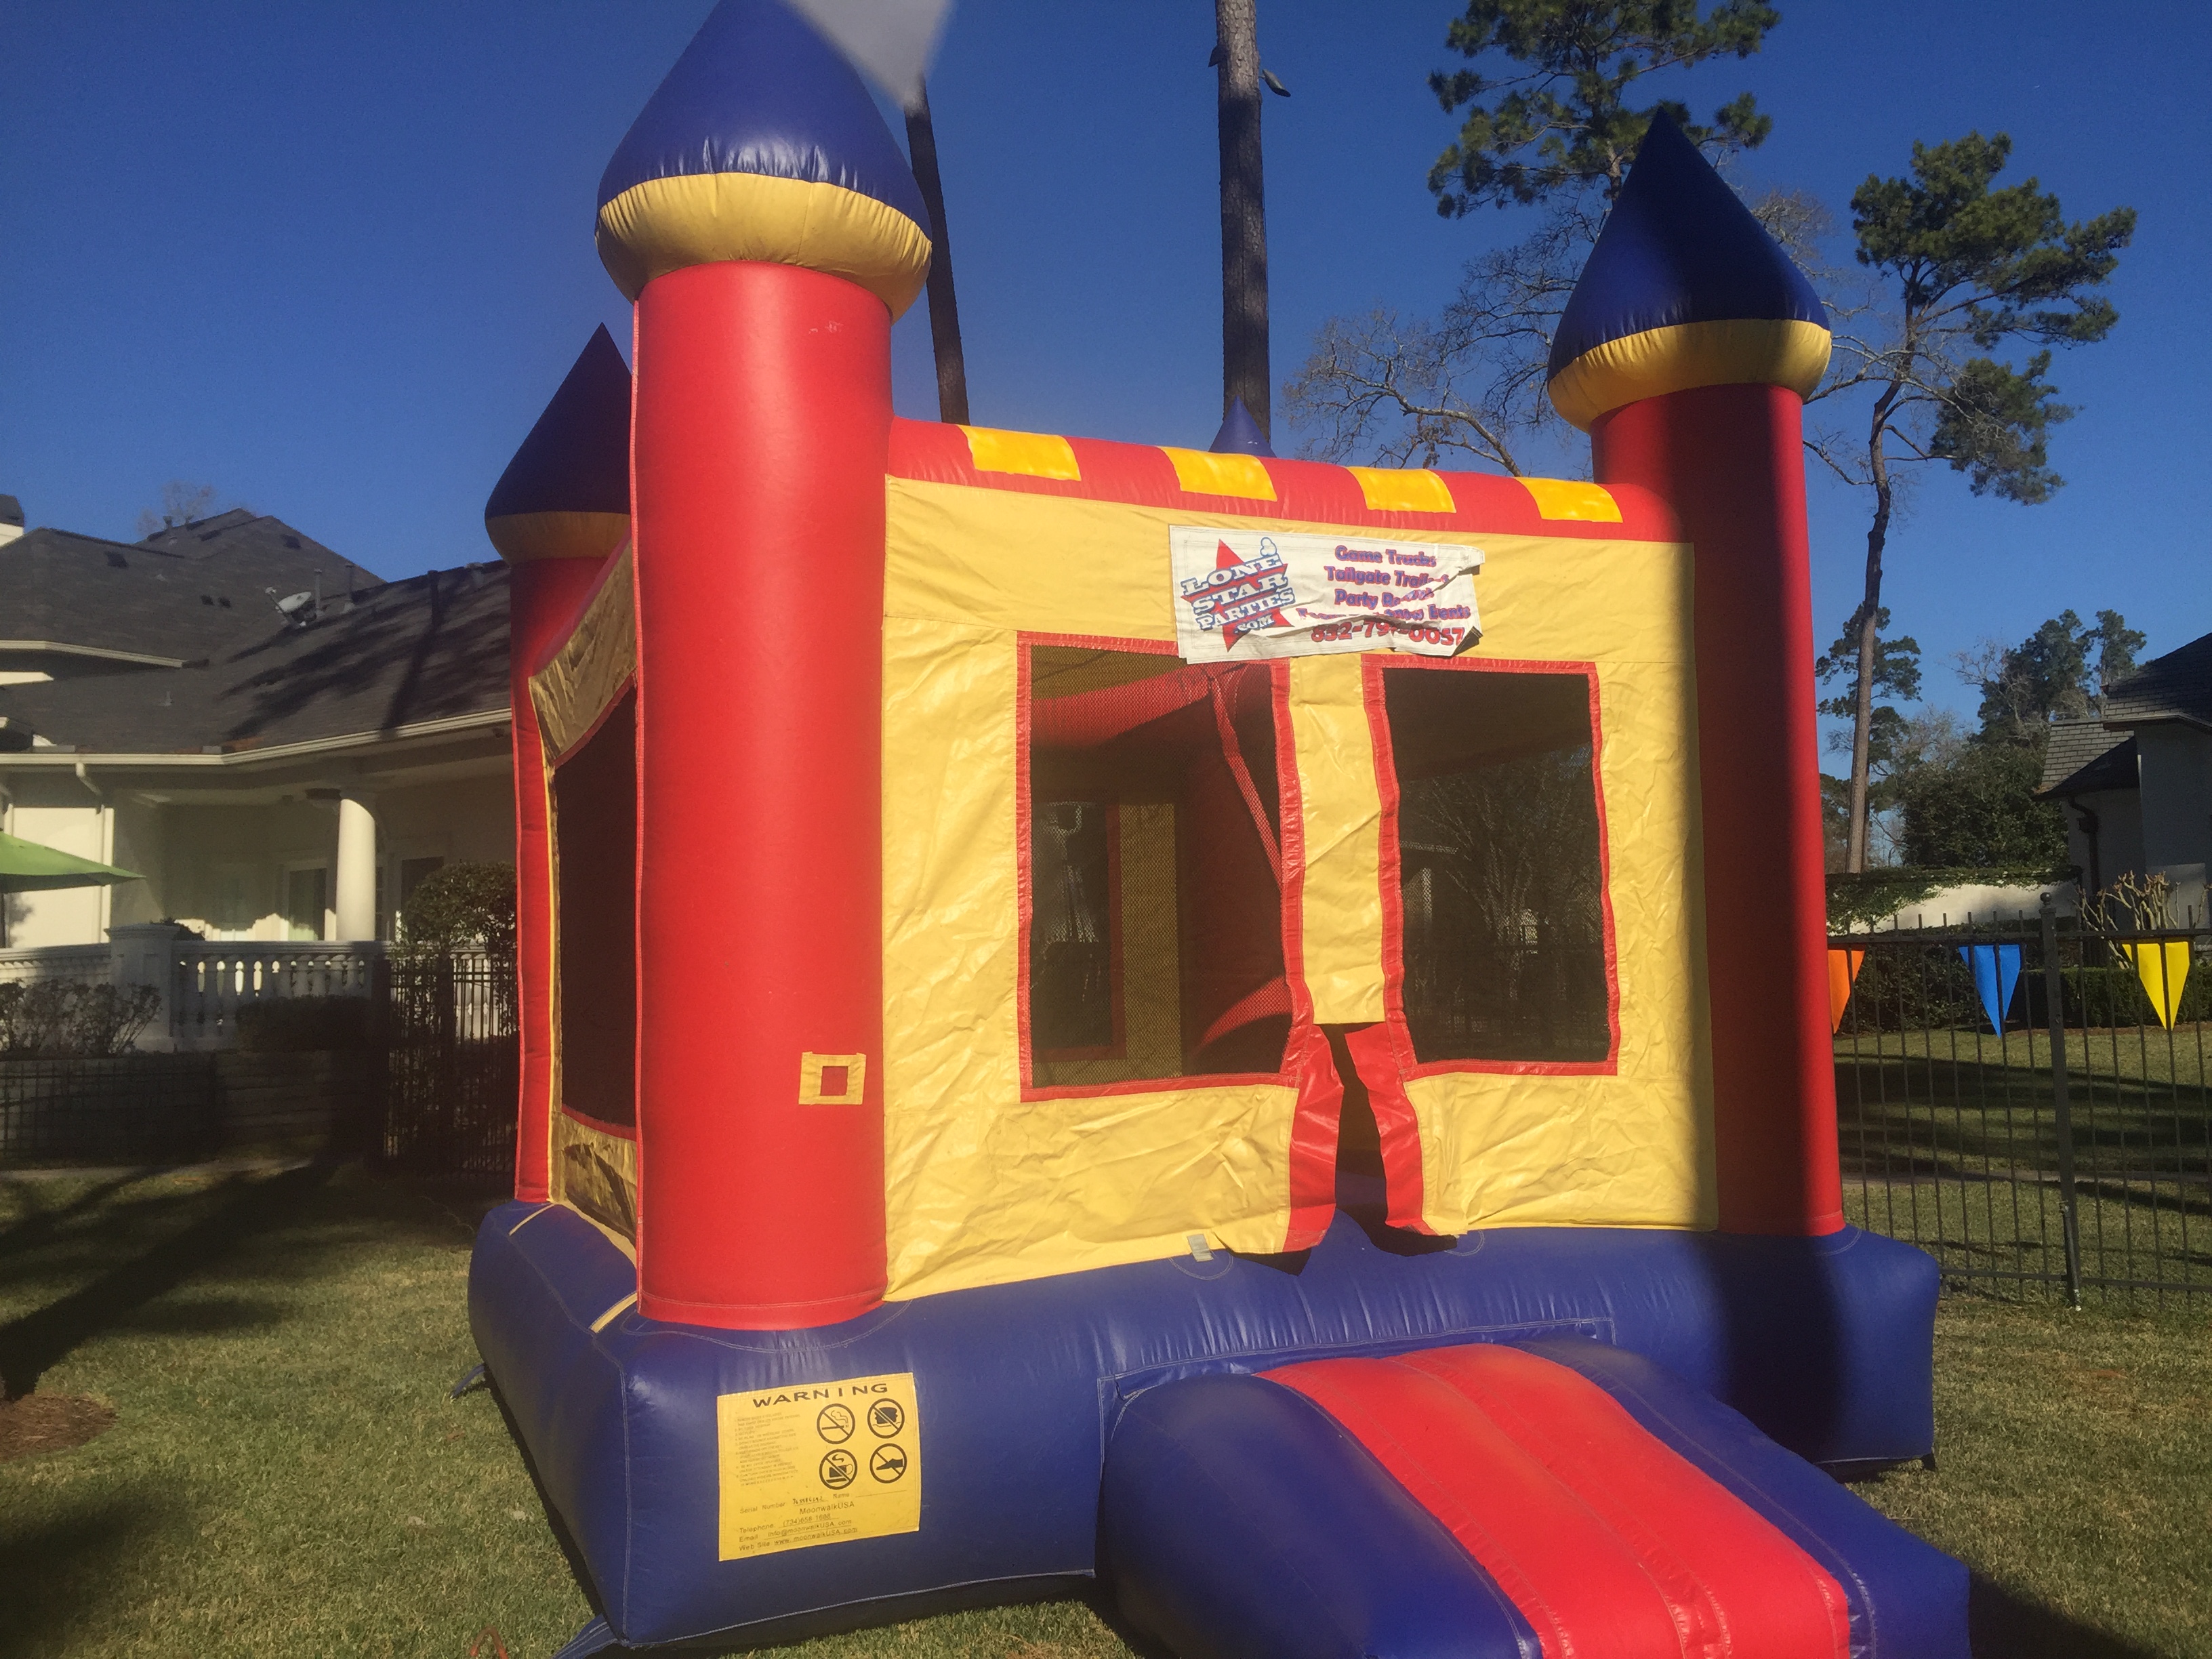 inflatable bounce house rental